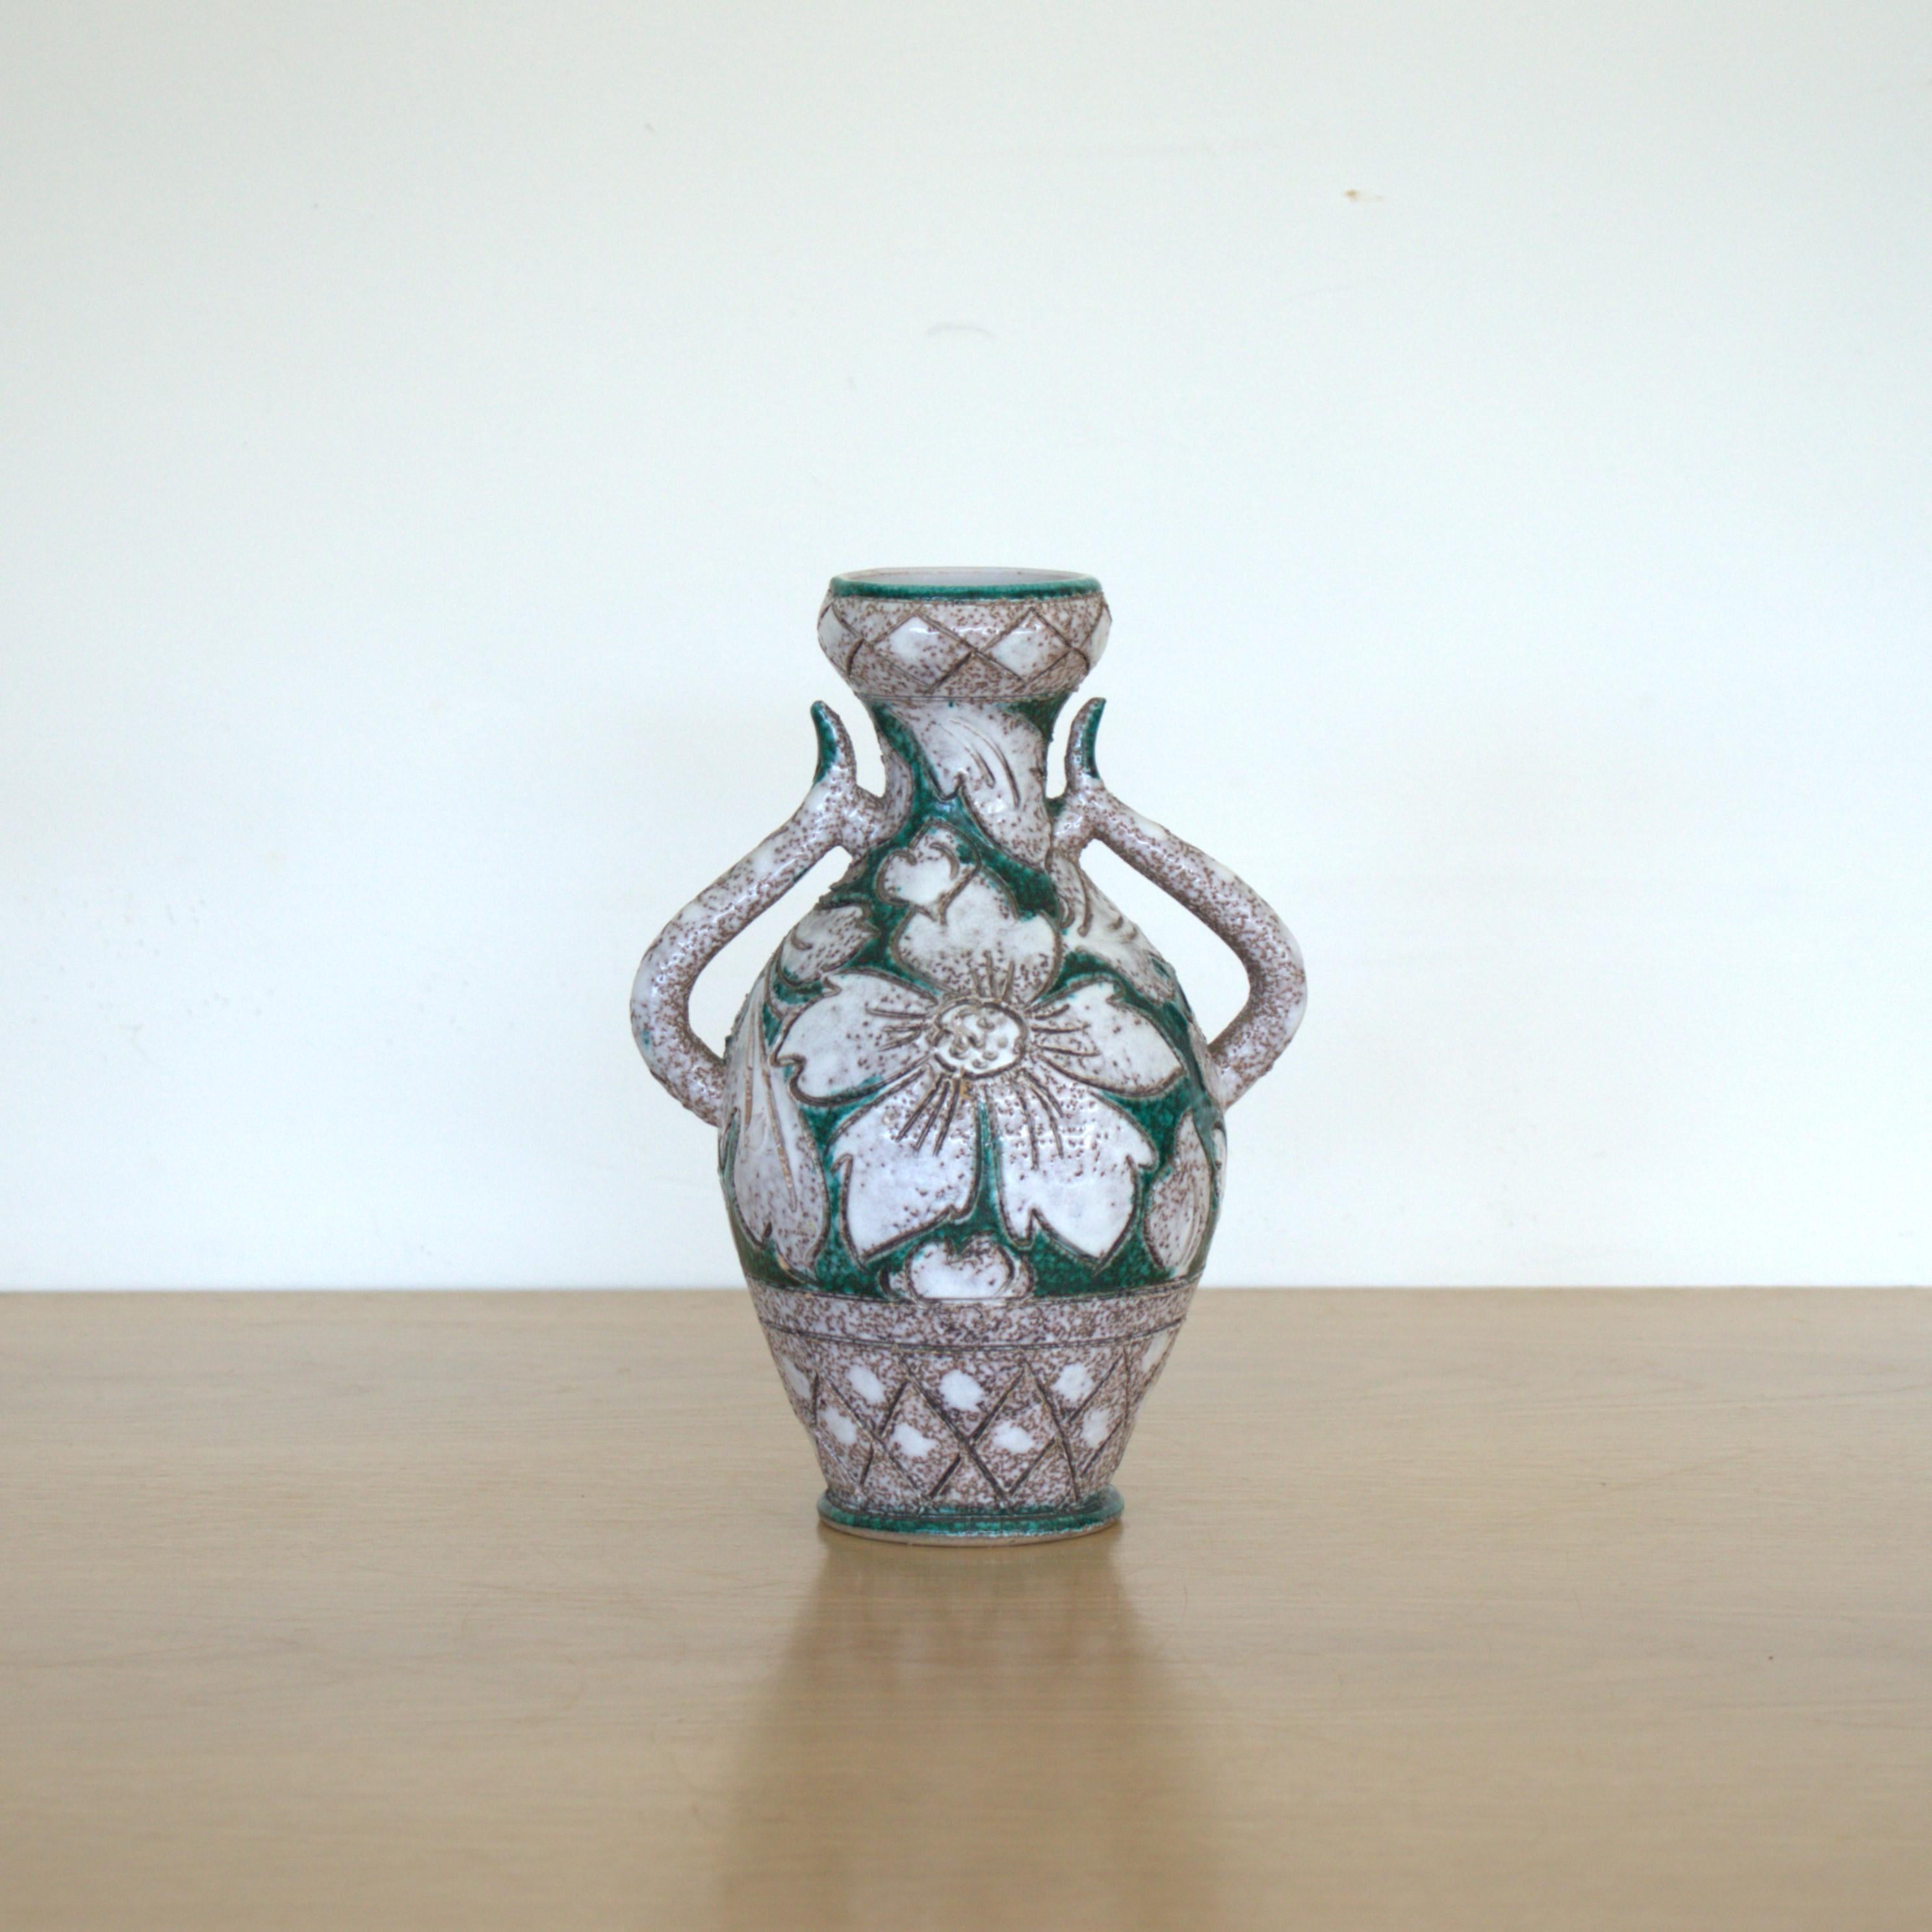 Beautiful ceramic vase from France, 1960s. Handmade amphora shape with off white glaze and painted green and brown with etched floral motif. 